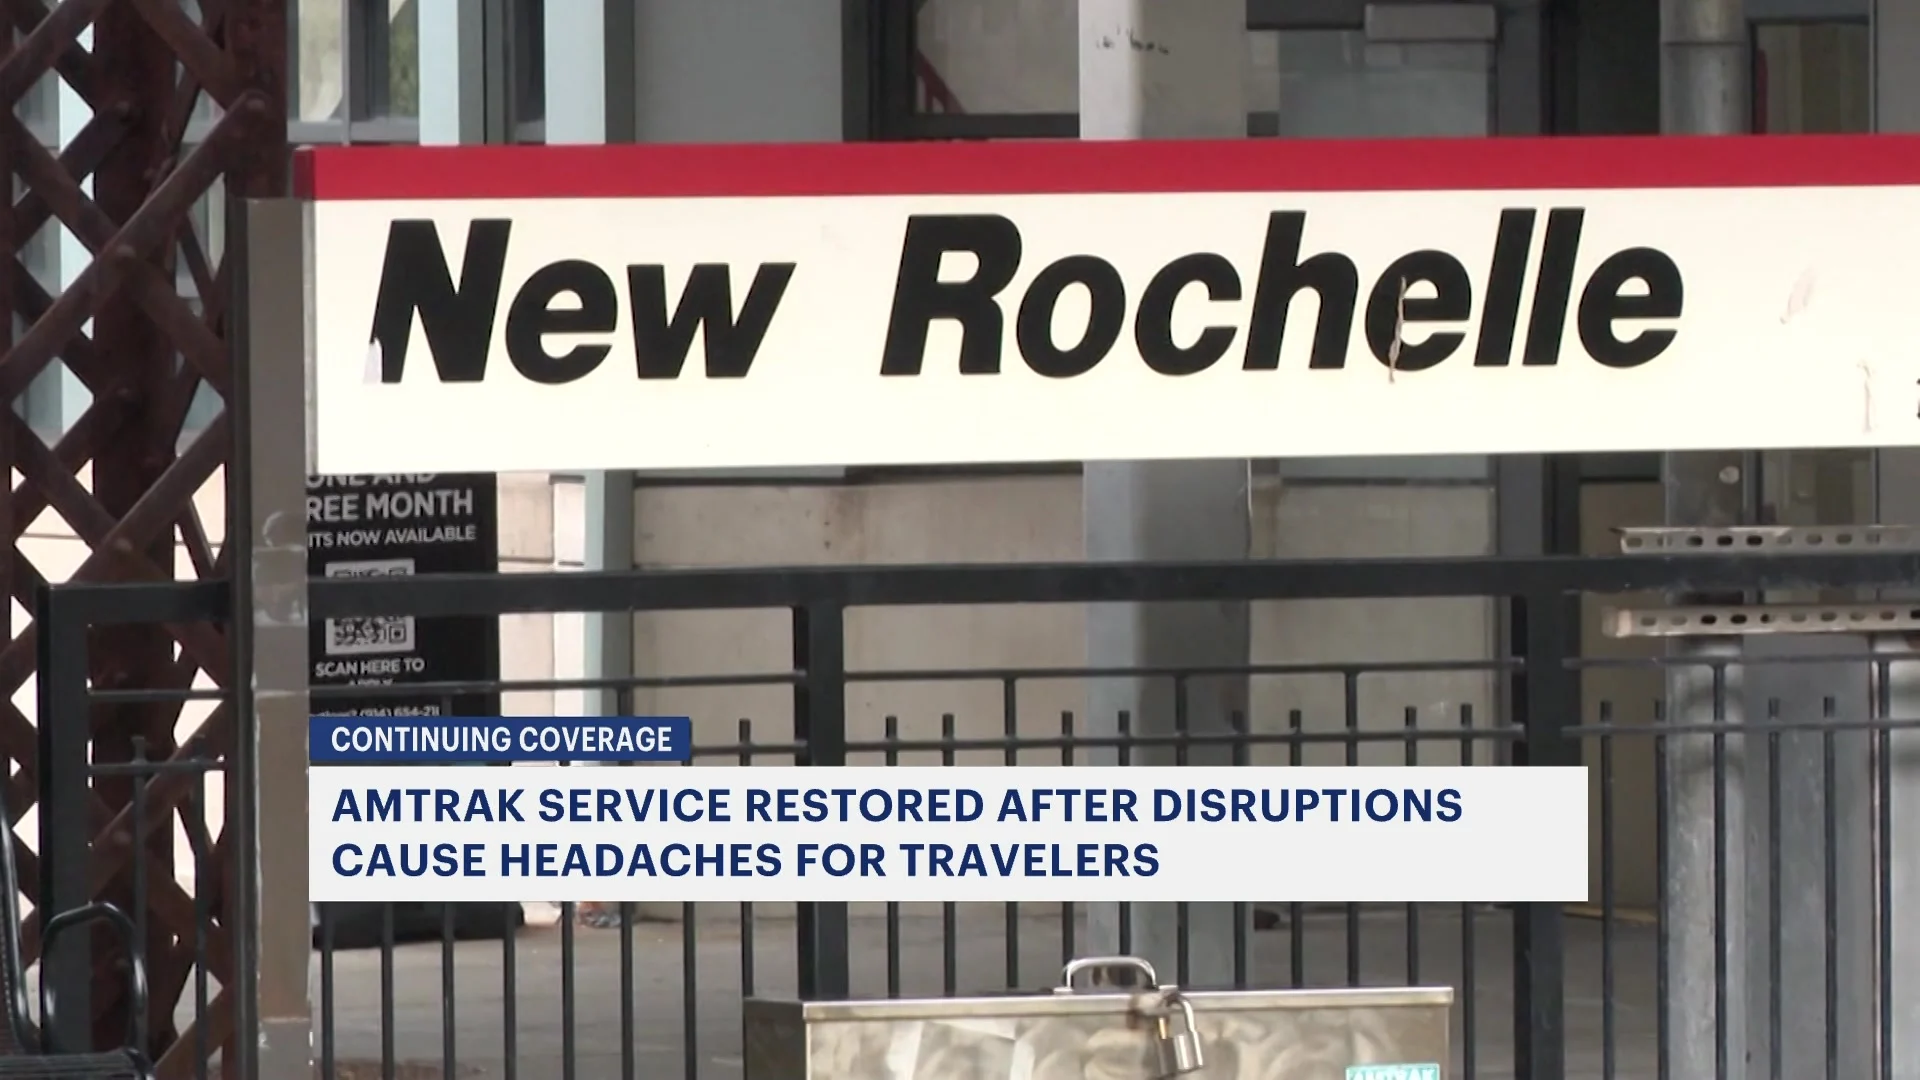 Amtrak service restored following disruptions from power loss